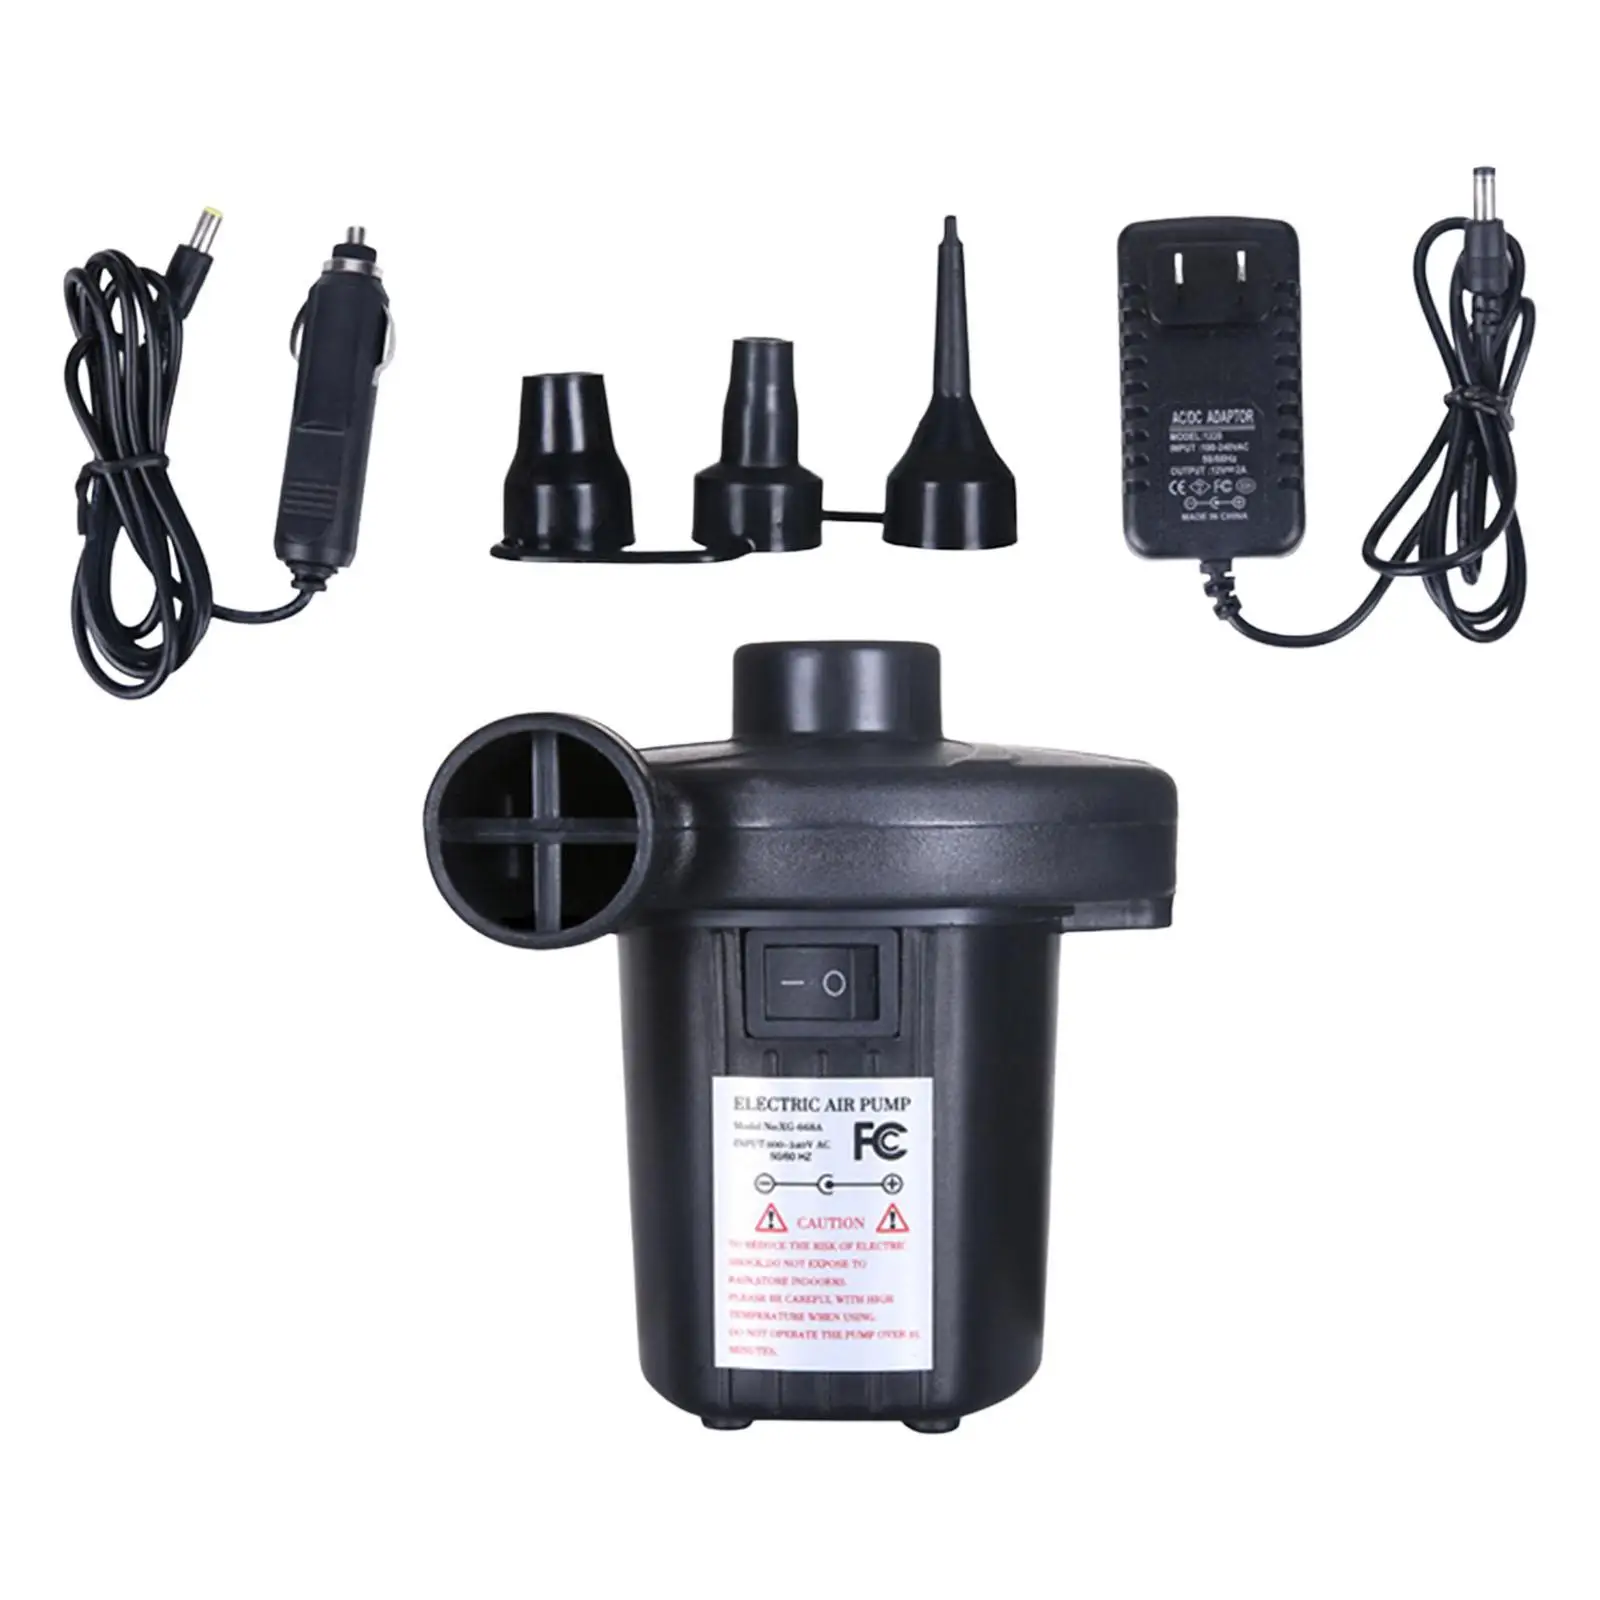 Electric Air Pump Portable ,with 3 Heads Nozzle Two Way Inflator Deflator for  Air Beds Cushions Mattress Boats Outdoor Camping